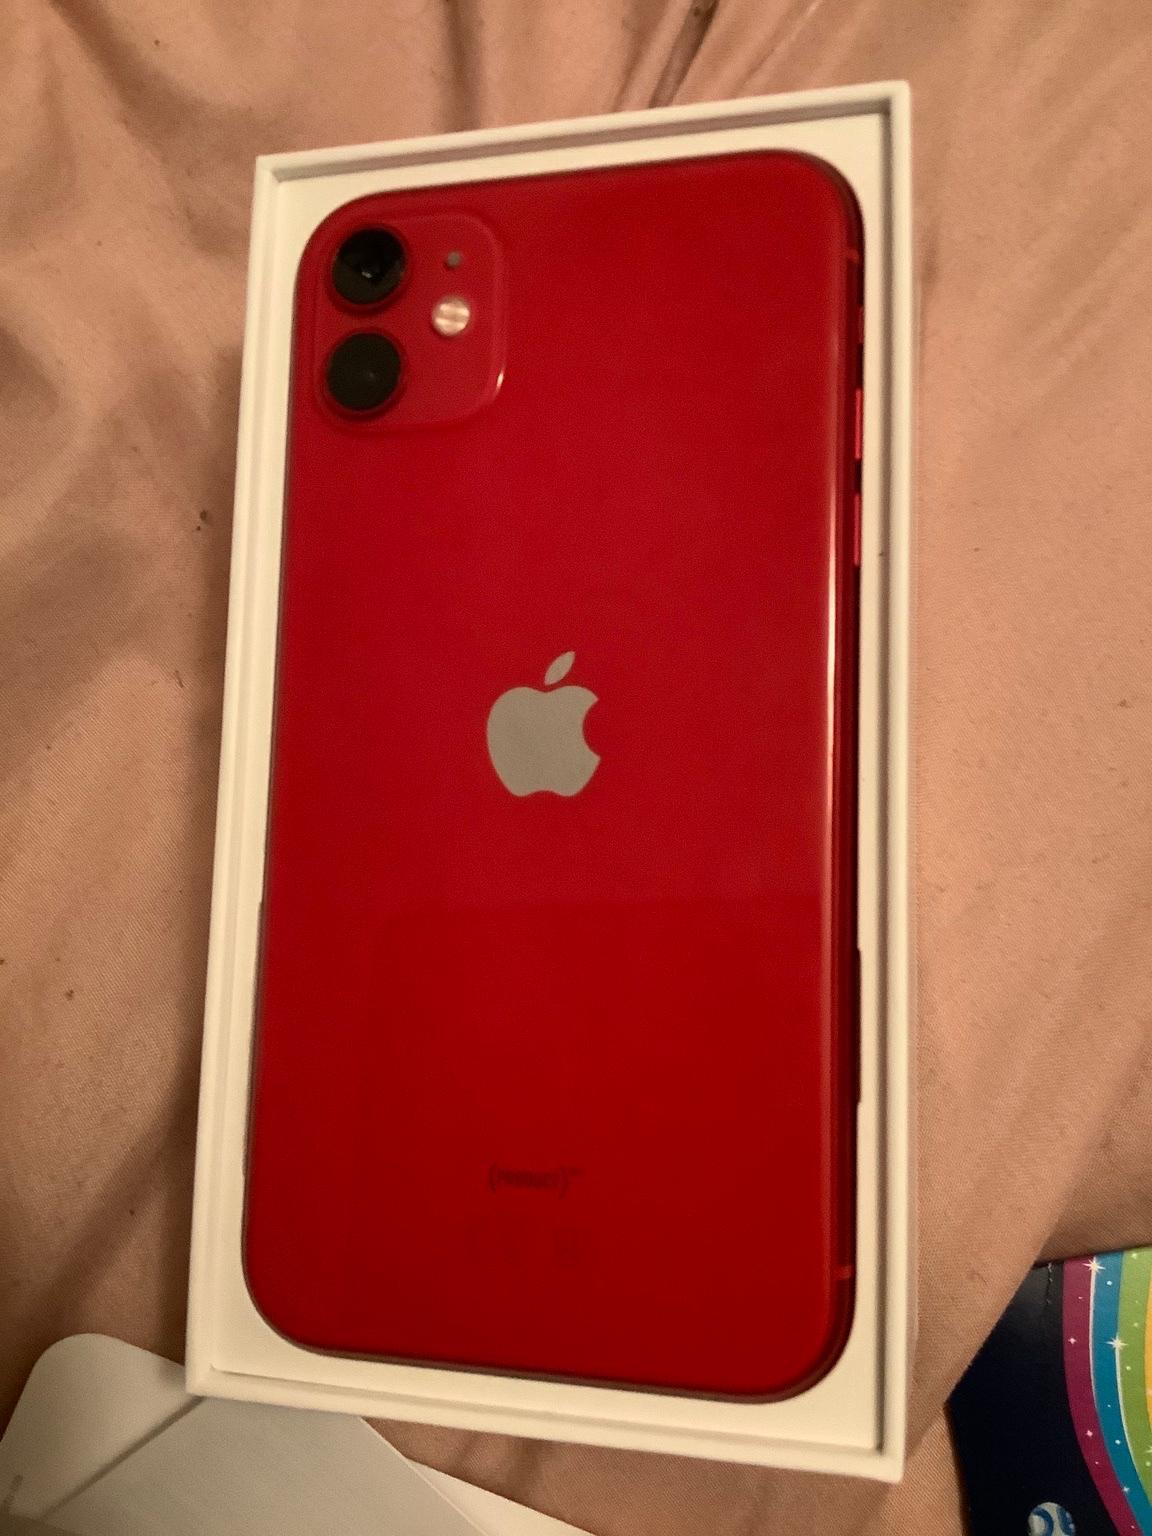 iPhone 11 Product Red 64 GB in SE3 Greenwich for £450.00 for sale | Shpock